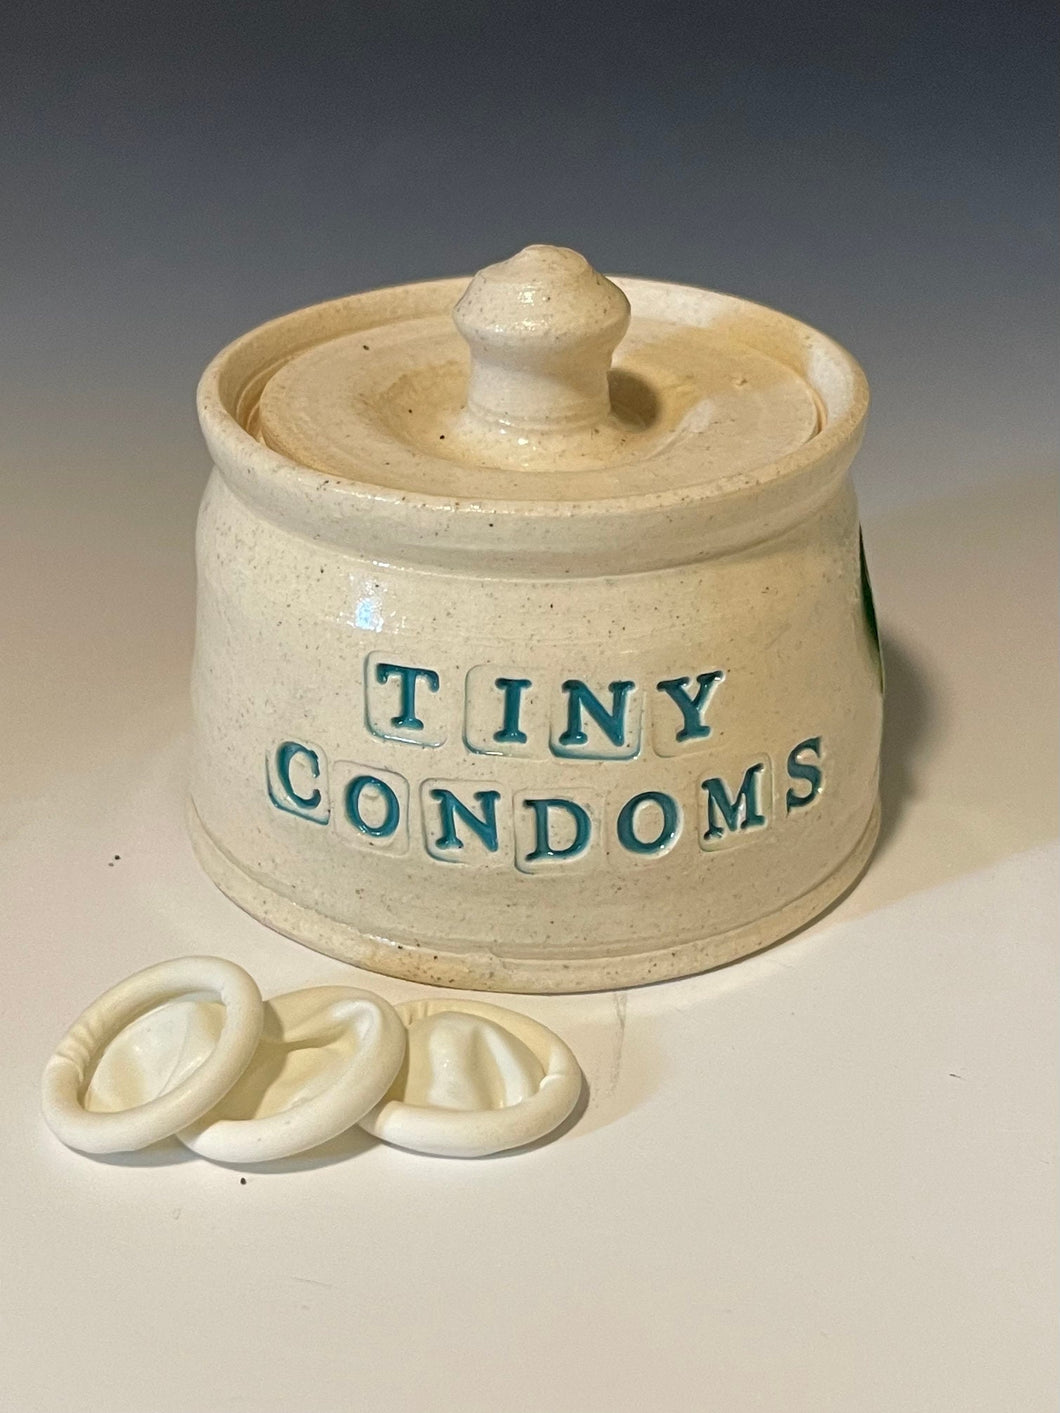 Tiny condoms jar to hold your finger cots, or tiny condoms.